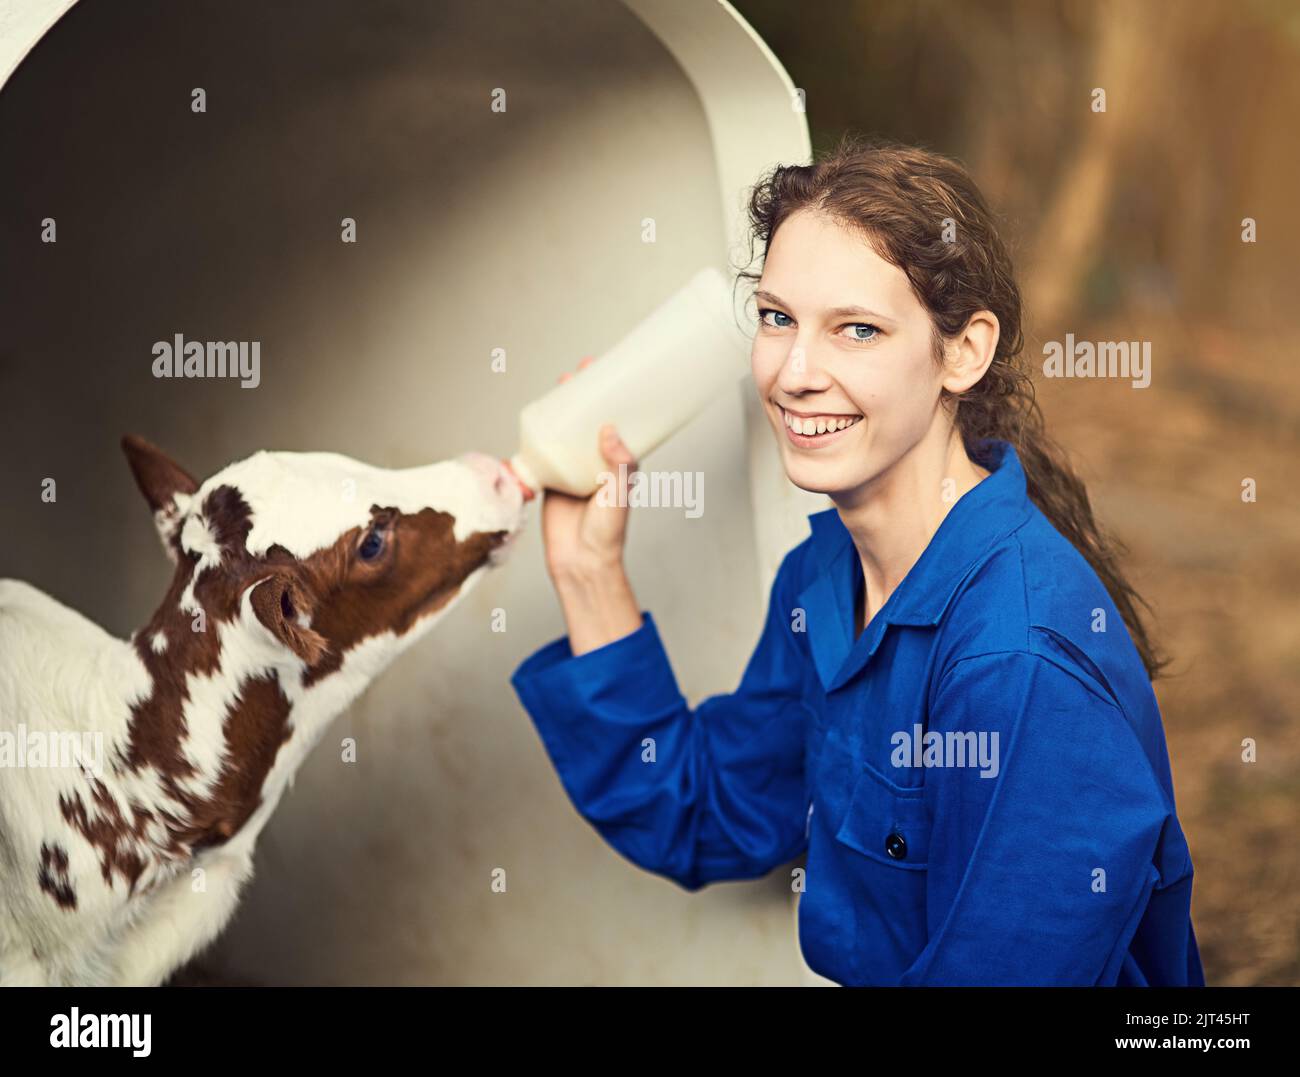 Livestock is my passion. Portrait of a female farmer feeding a calf by hand on the farm. Stock Photo